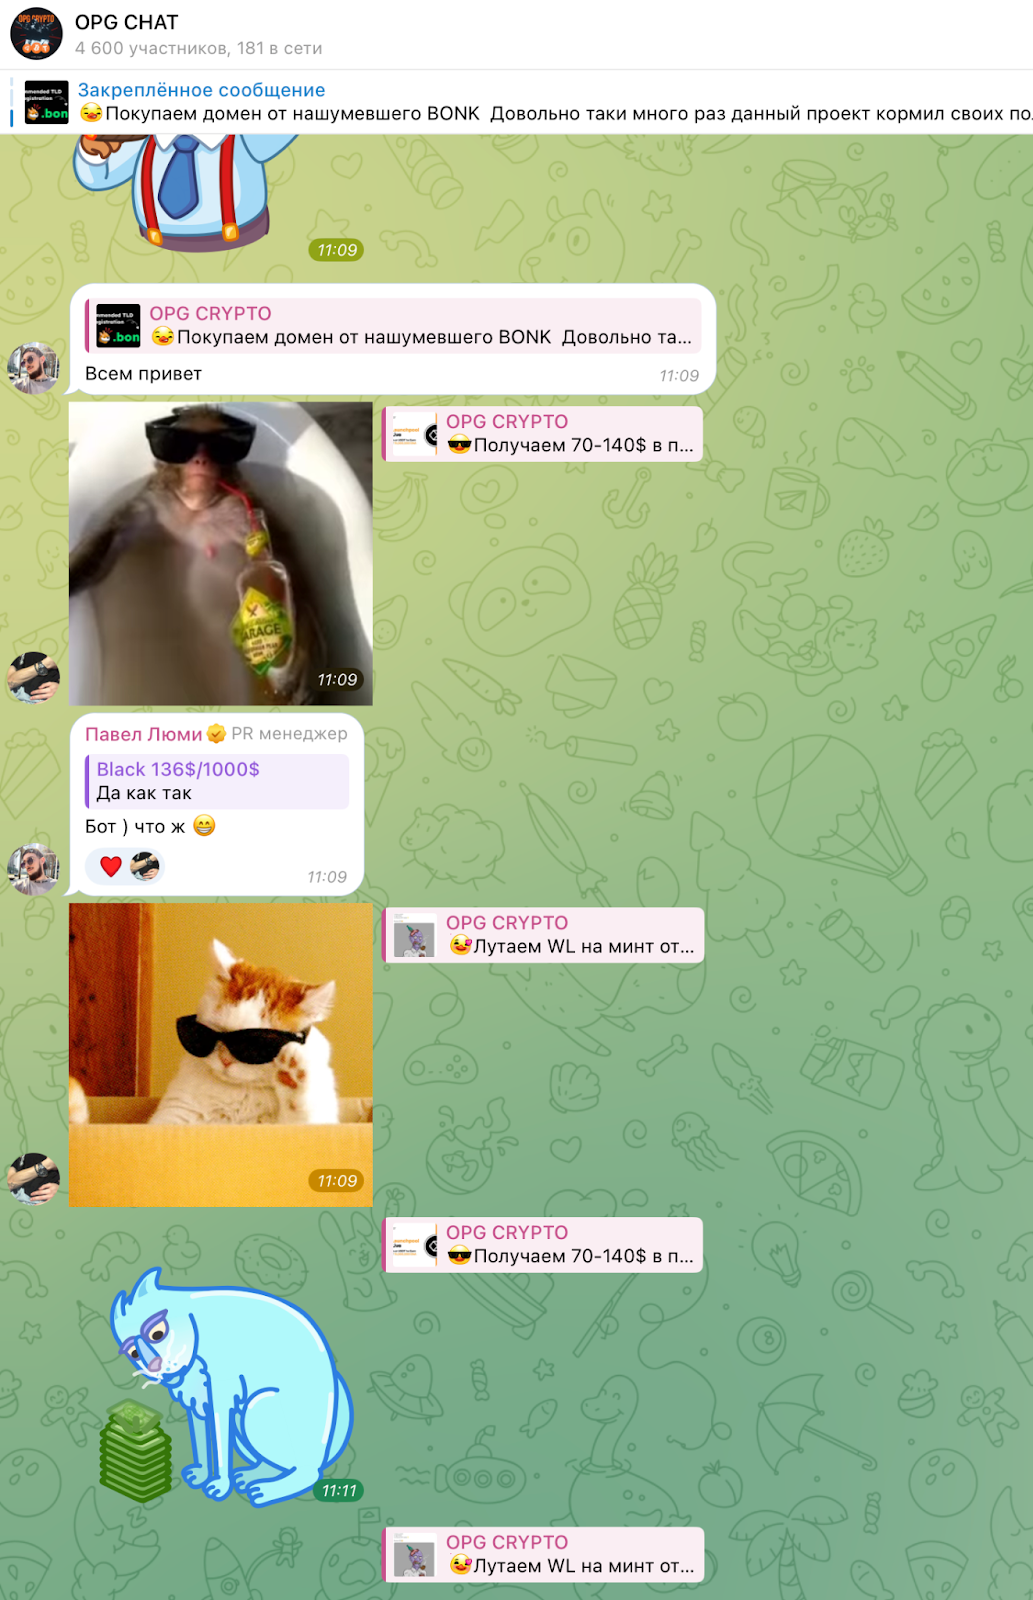 OPG CHAT